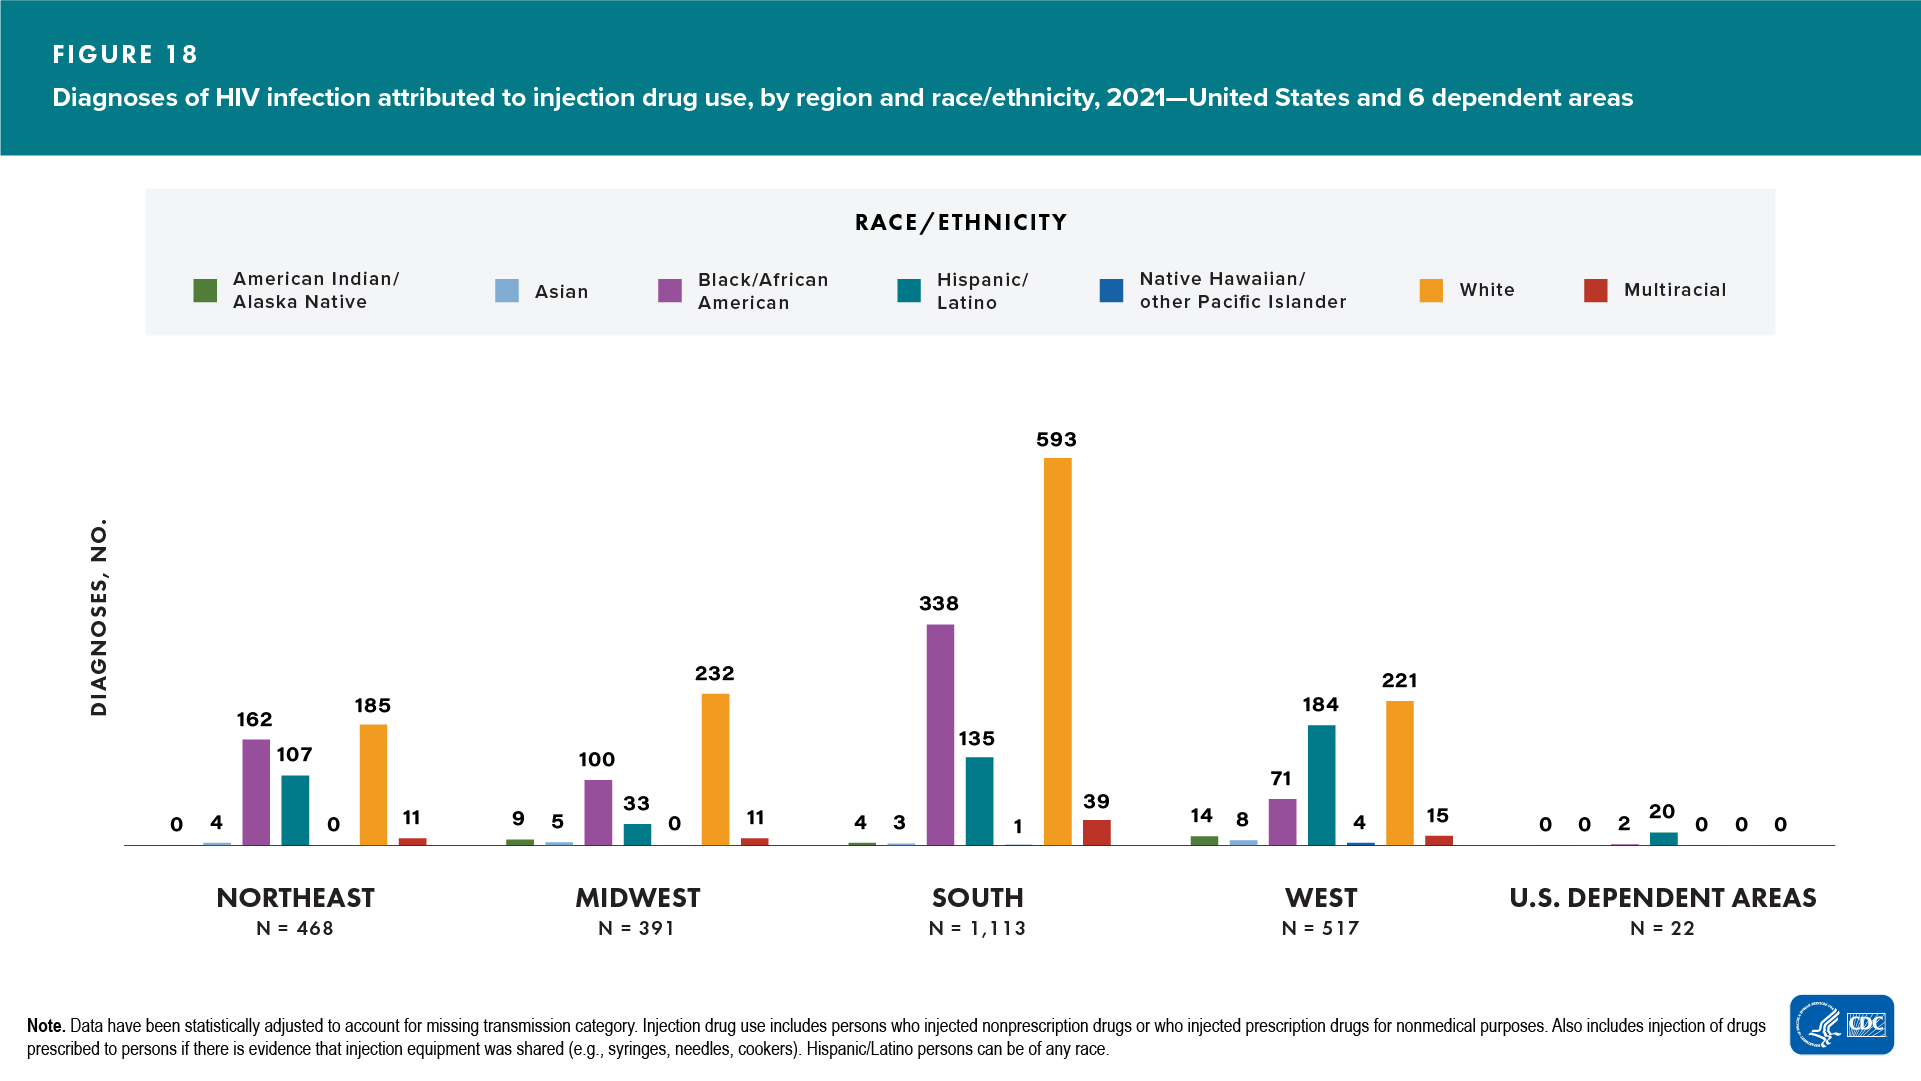 In 2021, among diagnoses of HIV infection attributed to injection drug use, White persons had the highest number of diagnoses in the Northeast, Midwest, South, and West. Hispanic/Latino persons had the highest number of diagnoses in U.S. dependent areas.